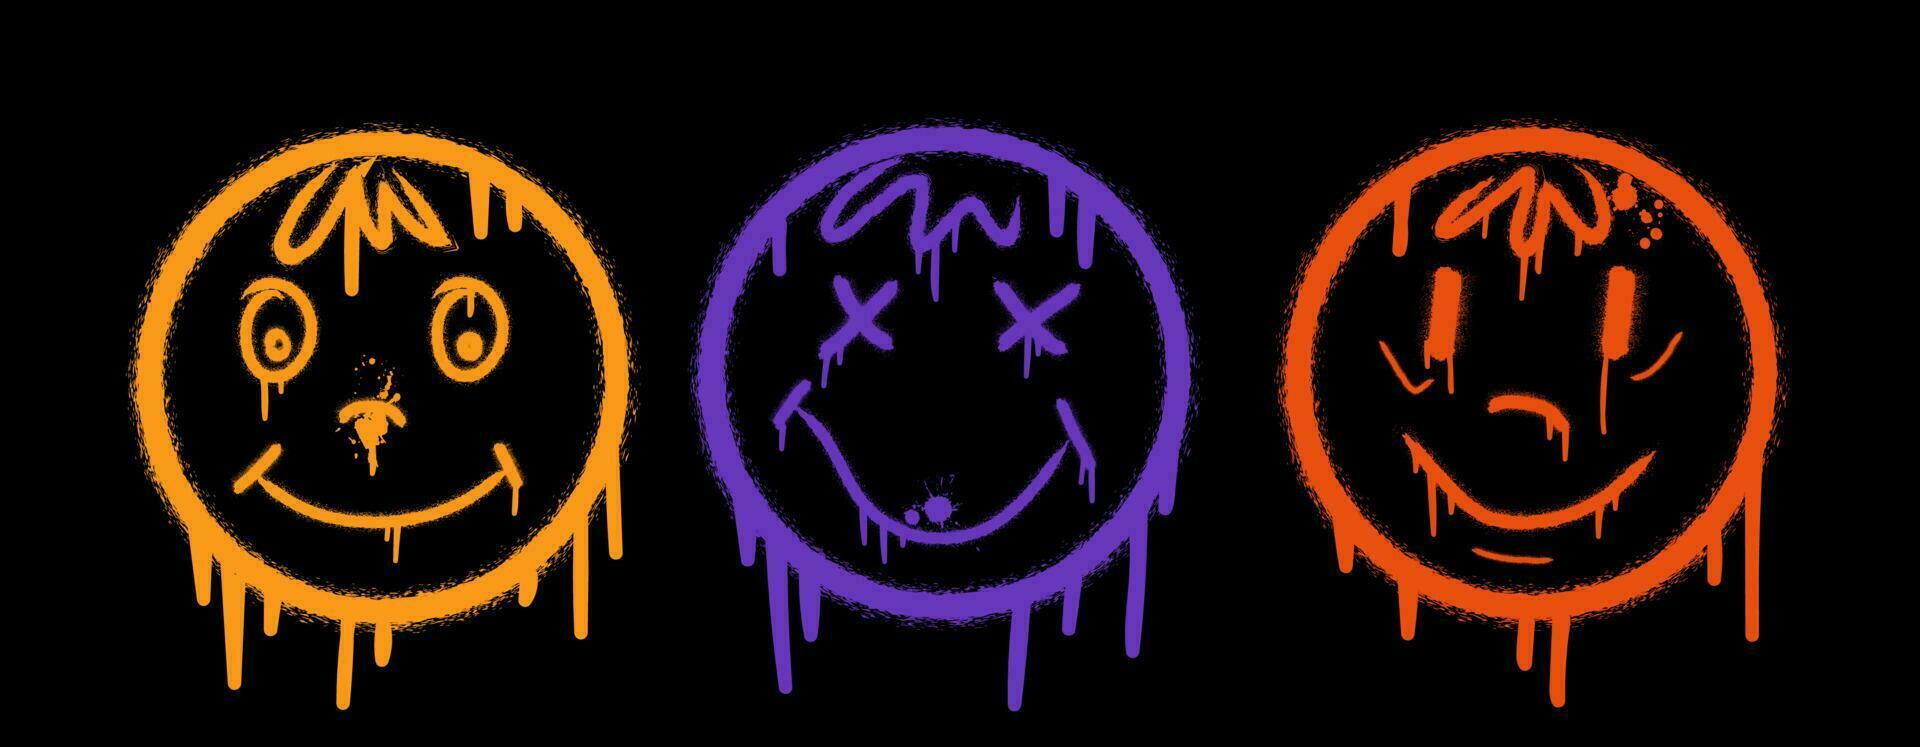 Three graffiti neon emoticons with splash effect and drops vector